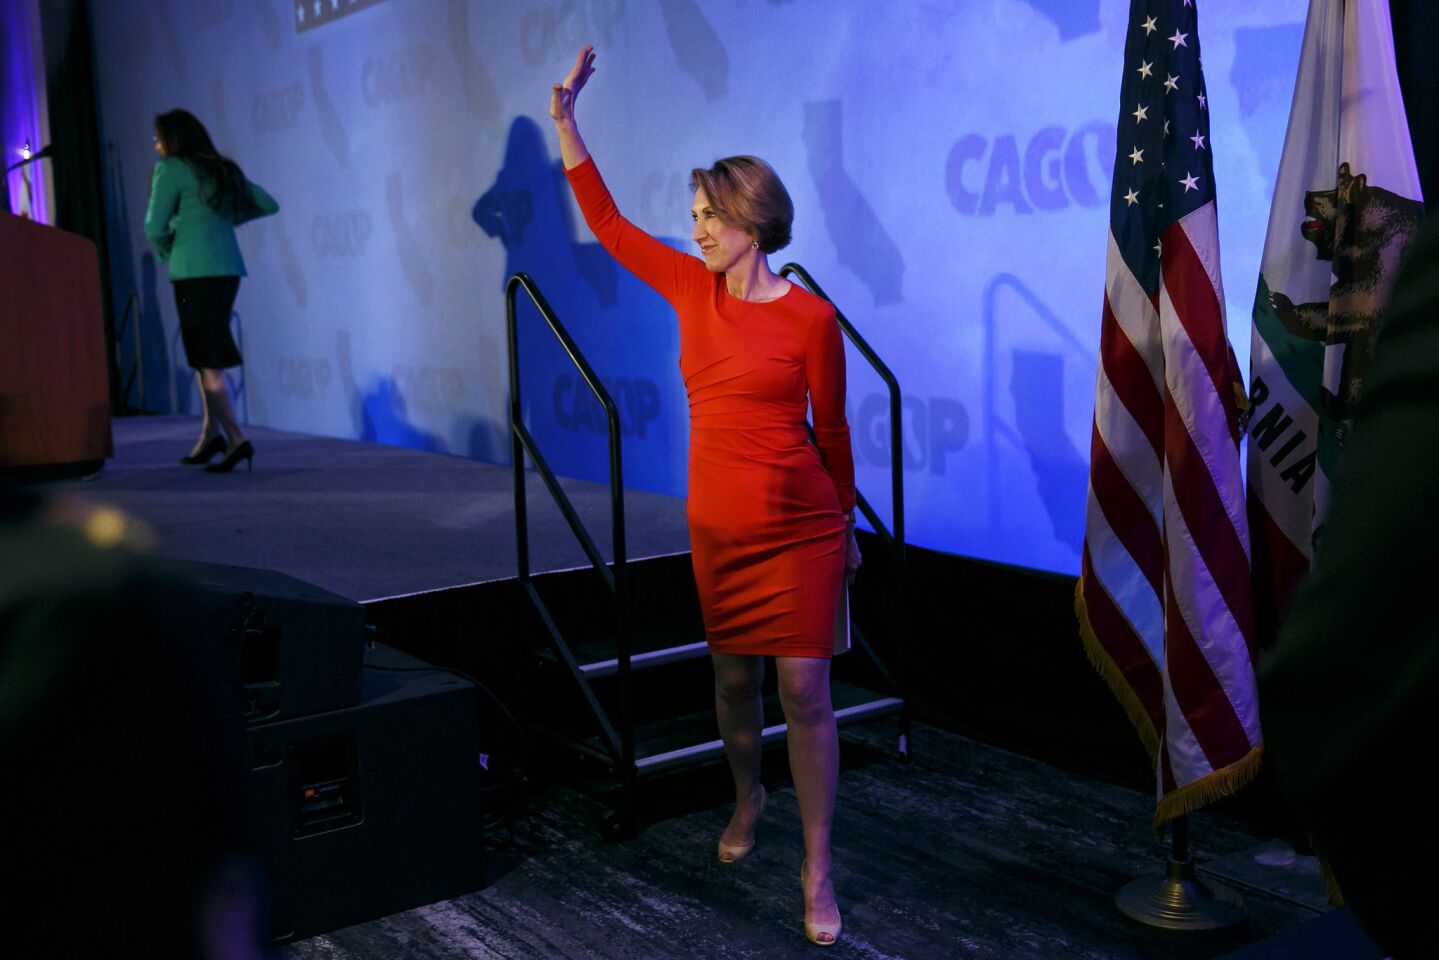 Carly Fiorina, Sen. Ted Cruz's would-be running mate, waves after making a keynote speech at the California Republican Party convention in Burlingame on Saturday.